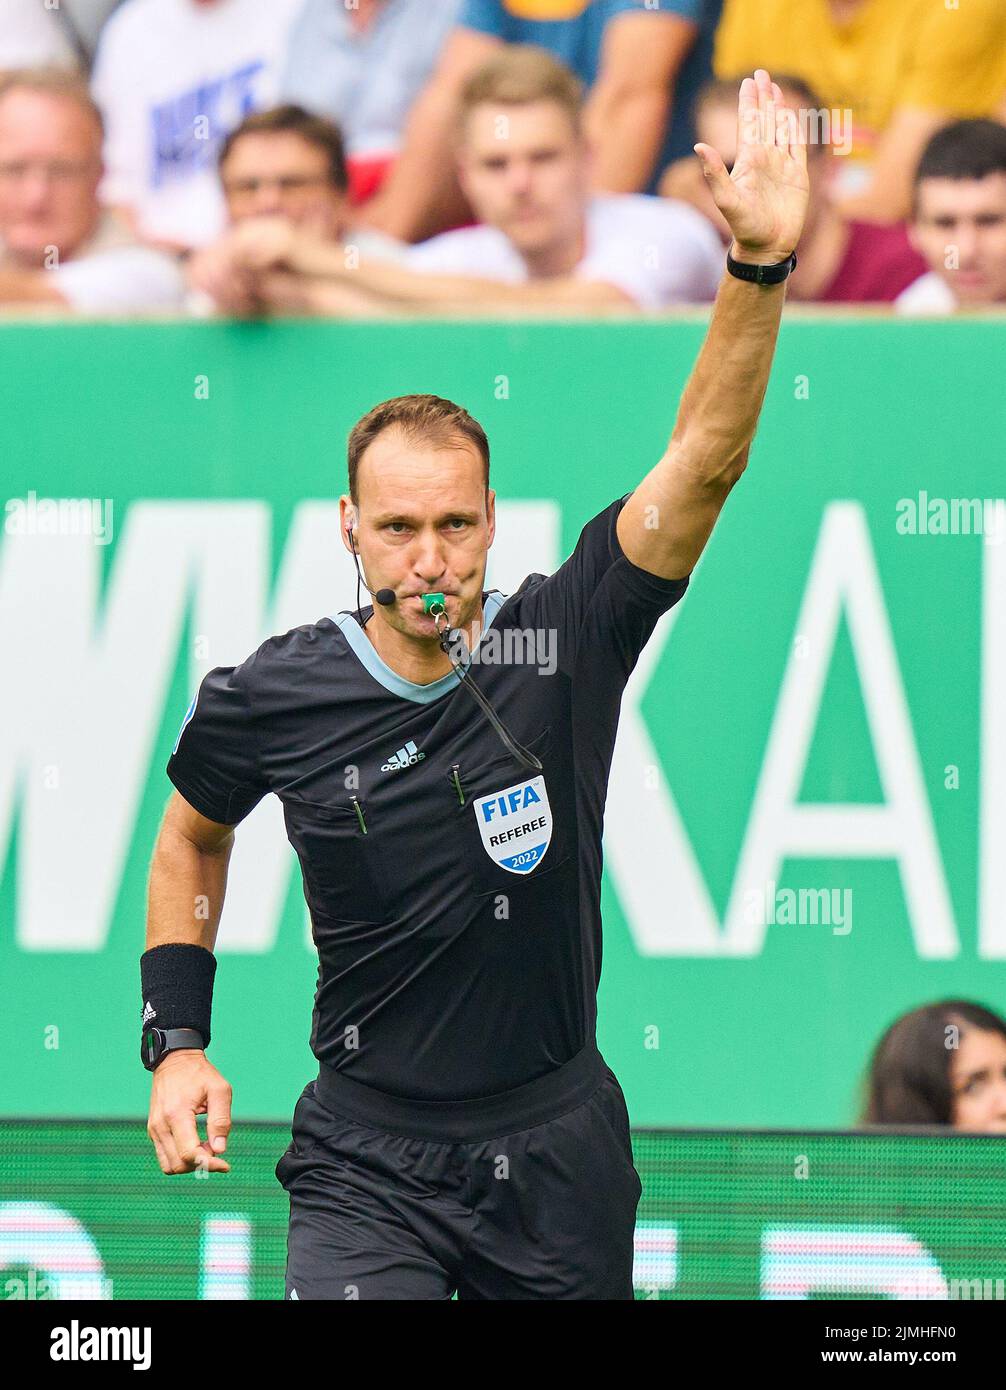 Referee Christian Dingert with whistle, gestures, shows, watch, individual action, Schiedsrichter, Hauptschiedsrichter, schiri,  in the match FC AUGSBURG - SC FREIBURG 0-4 1.German Football League on Aug 06, 2022 in Augsburg, Germany. Season 2022/2023, matchday 1, 1.Bundesliga, FCB, Munich, 1.Spieltag © Peter Schatz / Alamy Live News    - DFL REGULATIONS PROHIBIT ANY USE OF PHOTOGRAPHS as IMAGE SEQUENCES and/or QUASI-VIDEO - Stock Photo